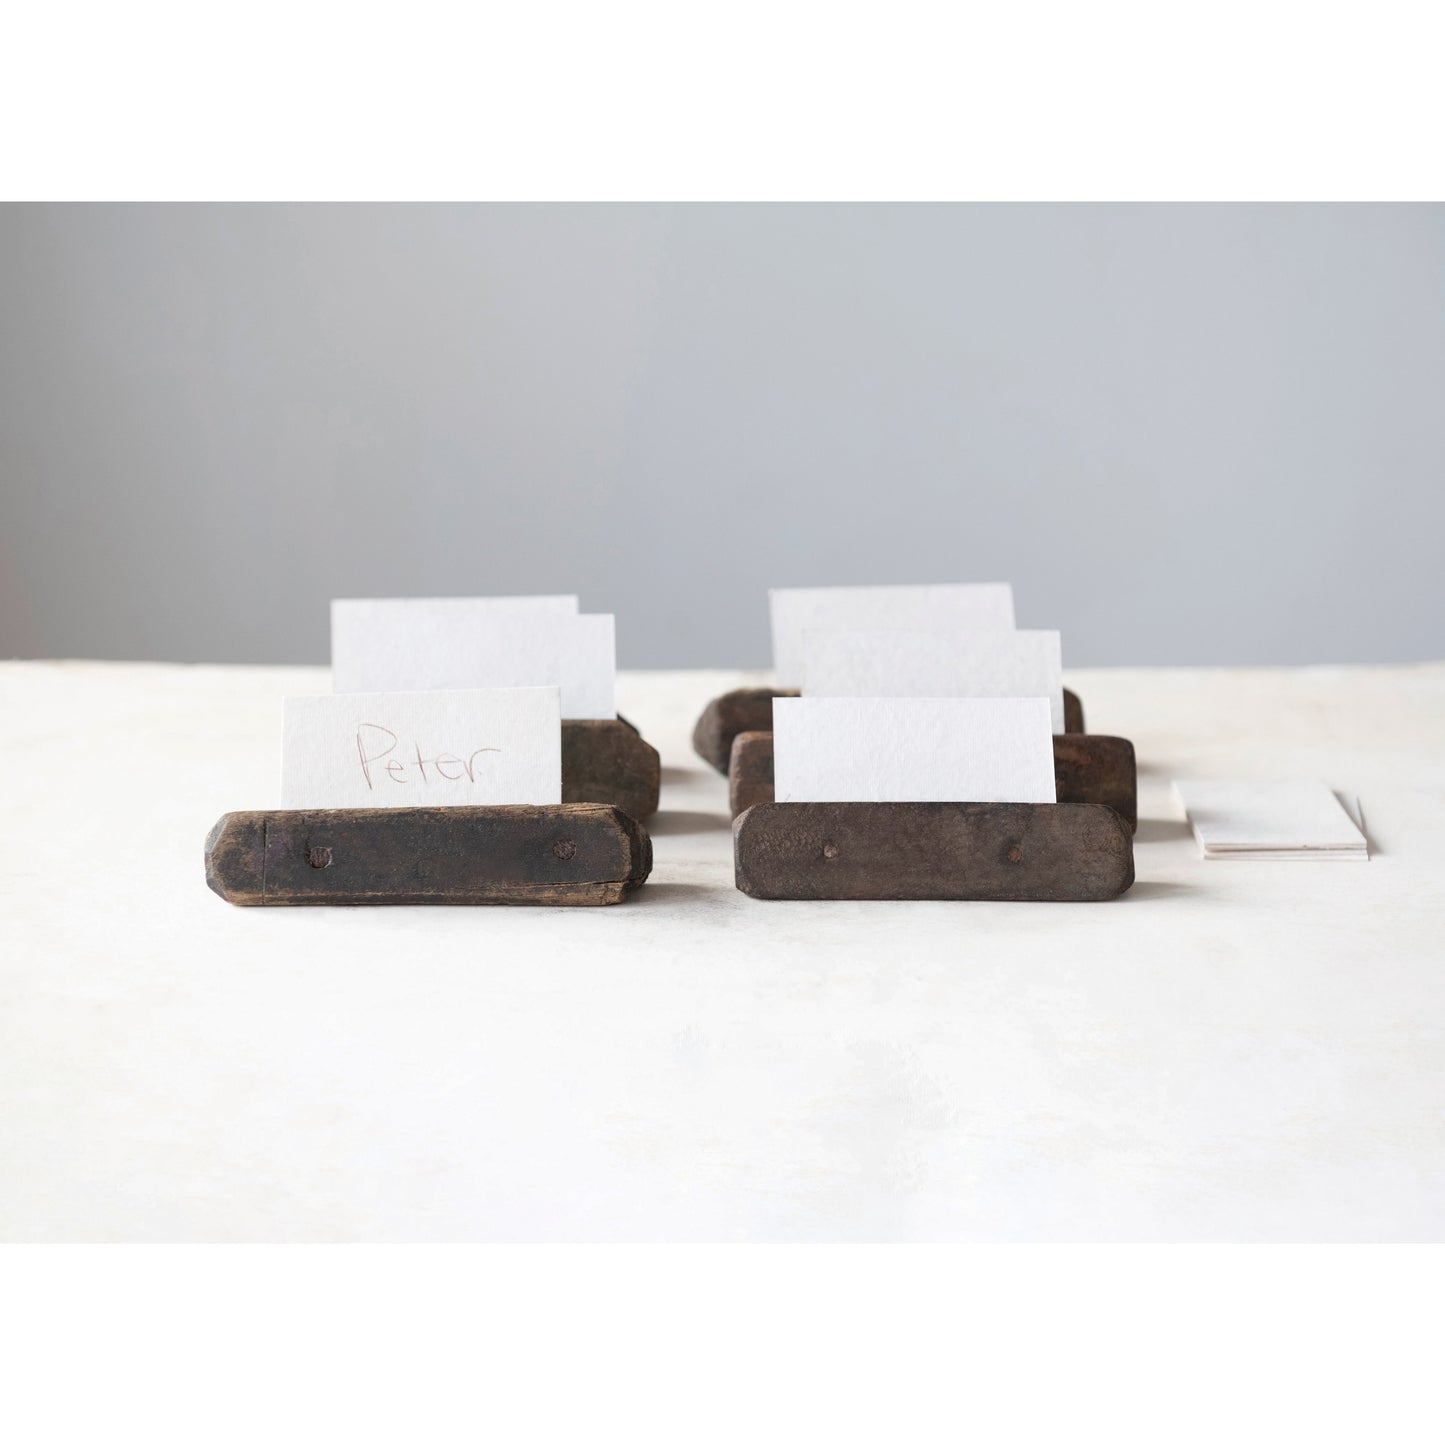 Reclaimed Wood Place Card Holder with 12 Cards, Boxed Set